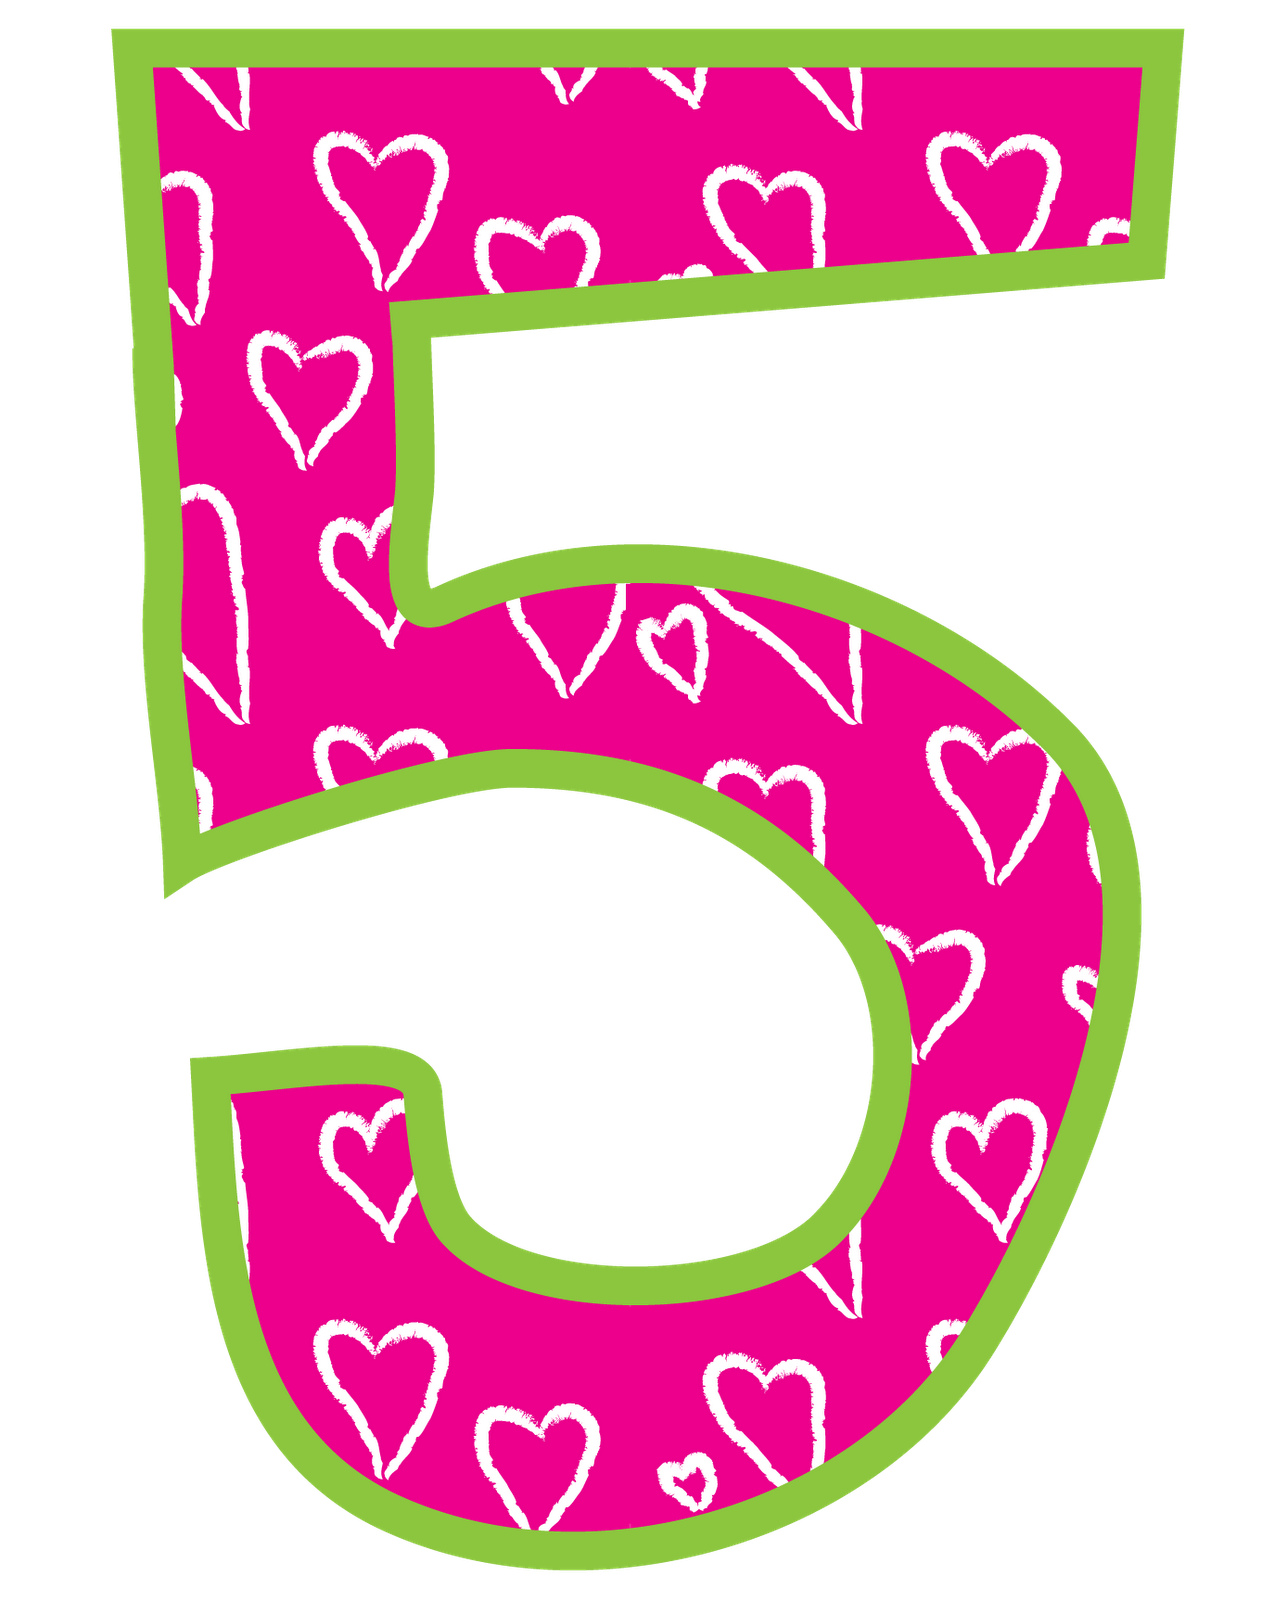 number 2 clipart pink